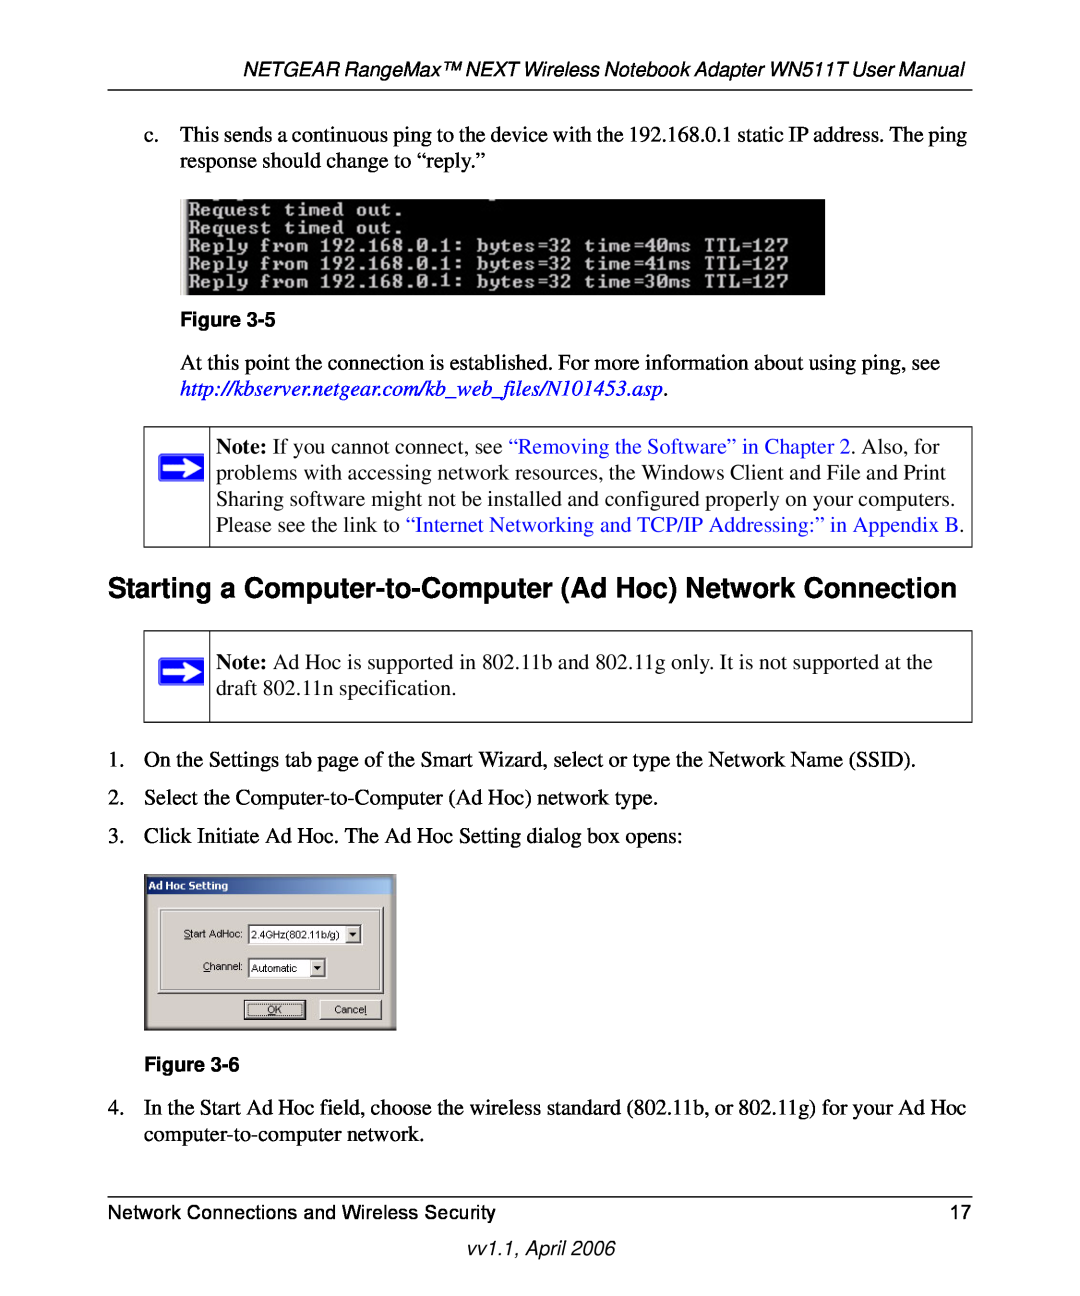 NETGEAR WN511T user manual Starting a Computer-to-Computer Ad Hoc Network Connection 